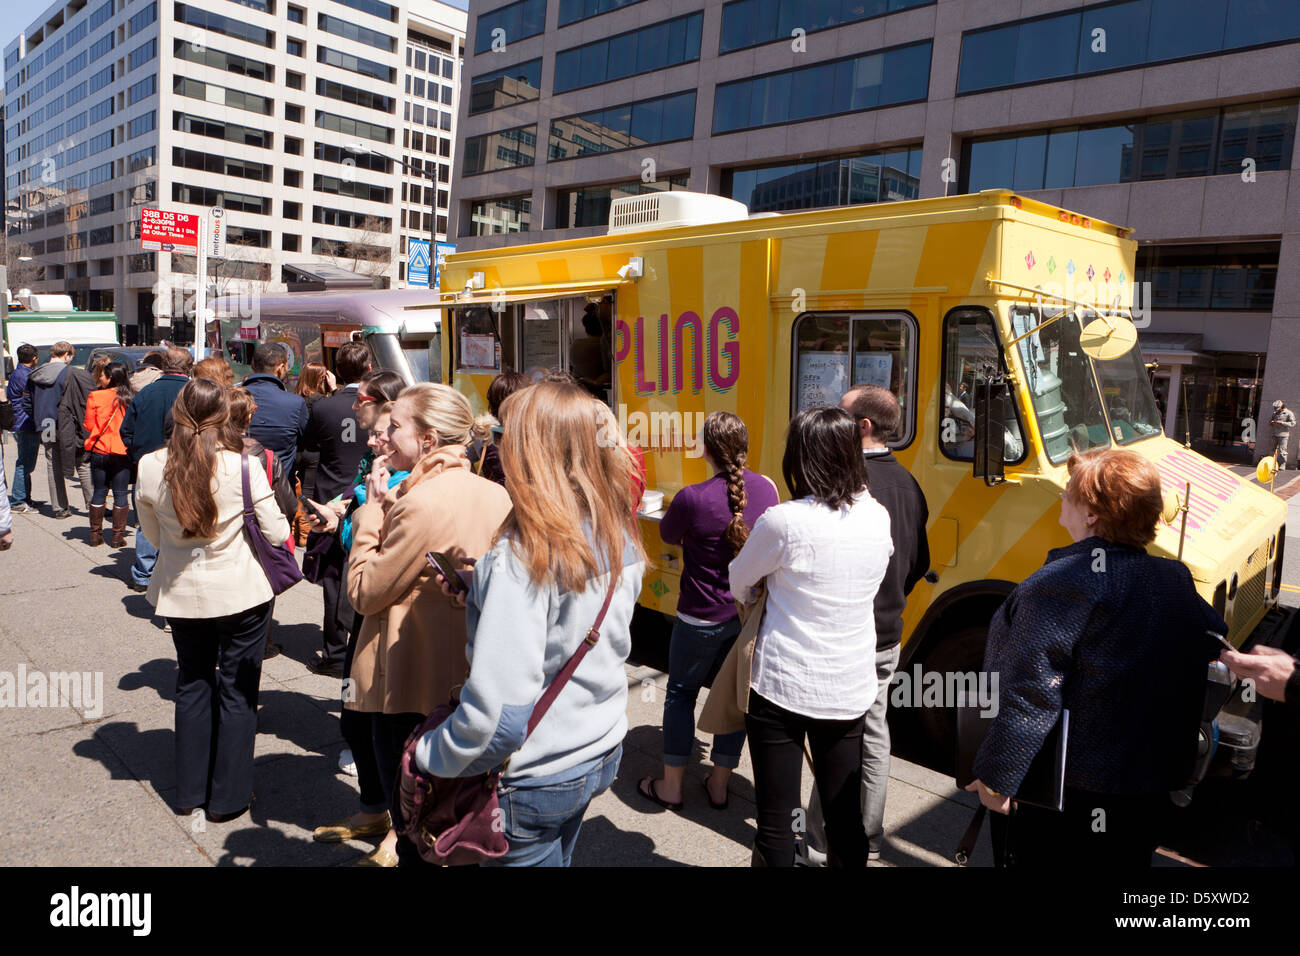 People in queue at a Food truck - USA Stock Photo